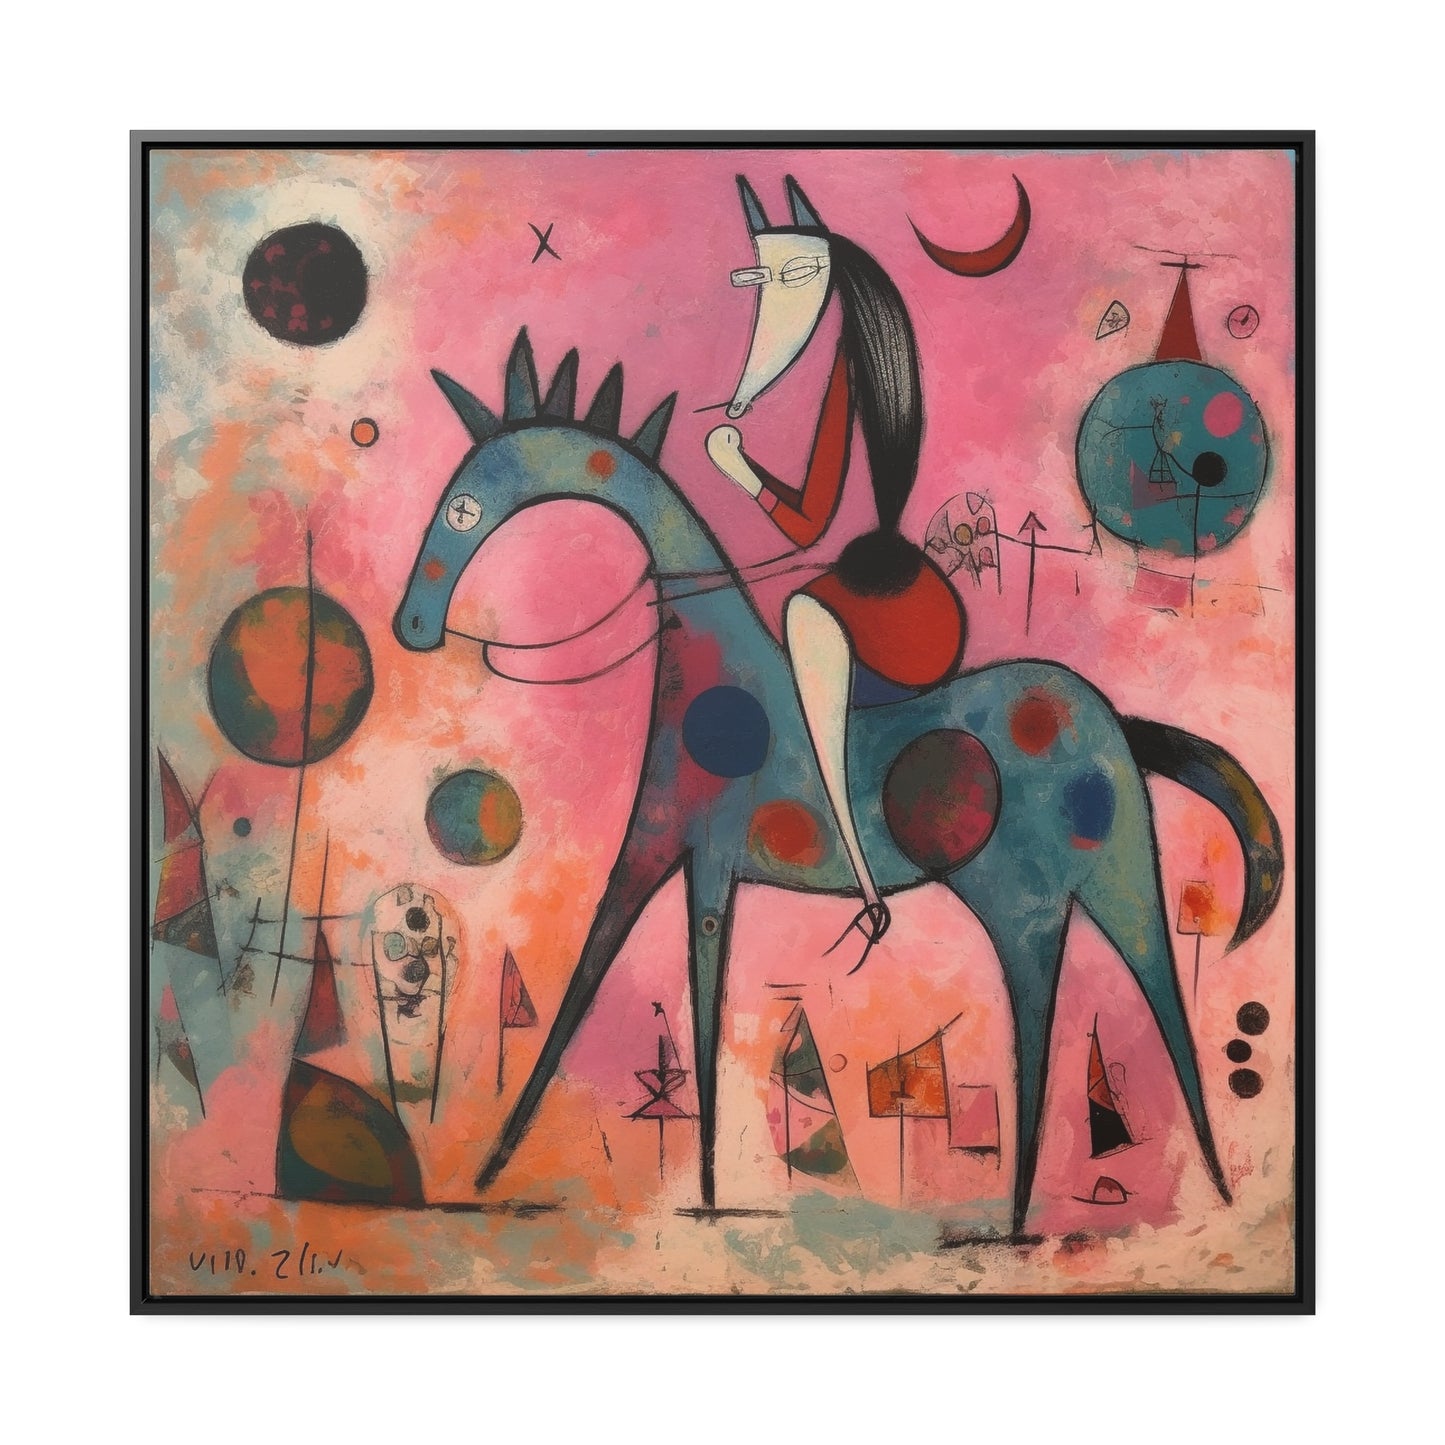 The Dreams of the Child 34, Gallery Canvas Wraps, Square Frame